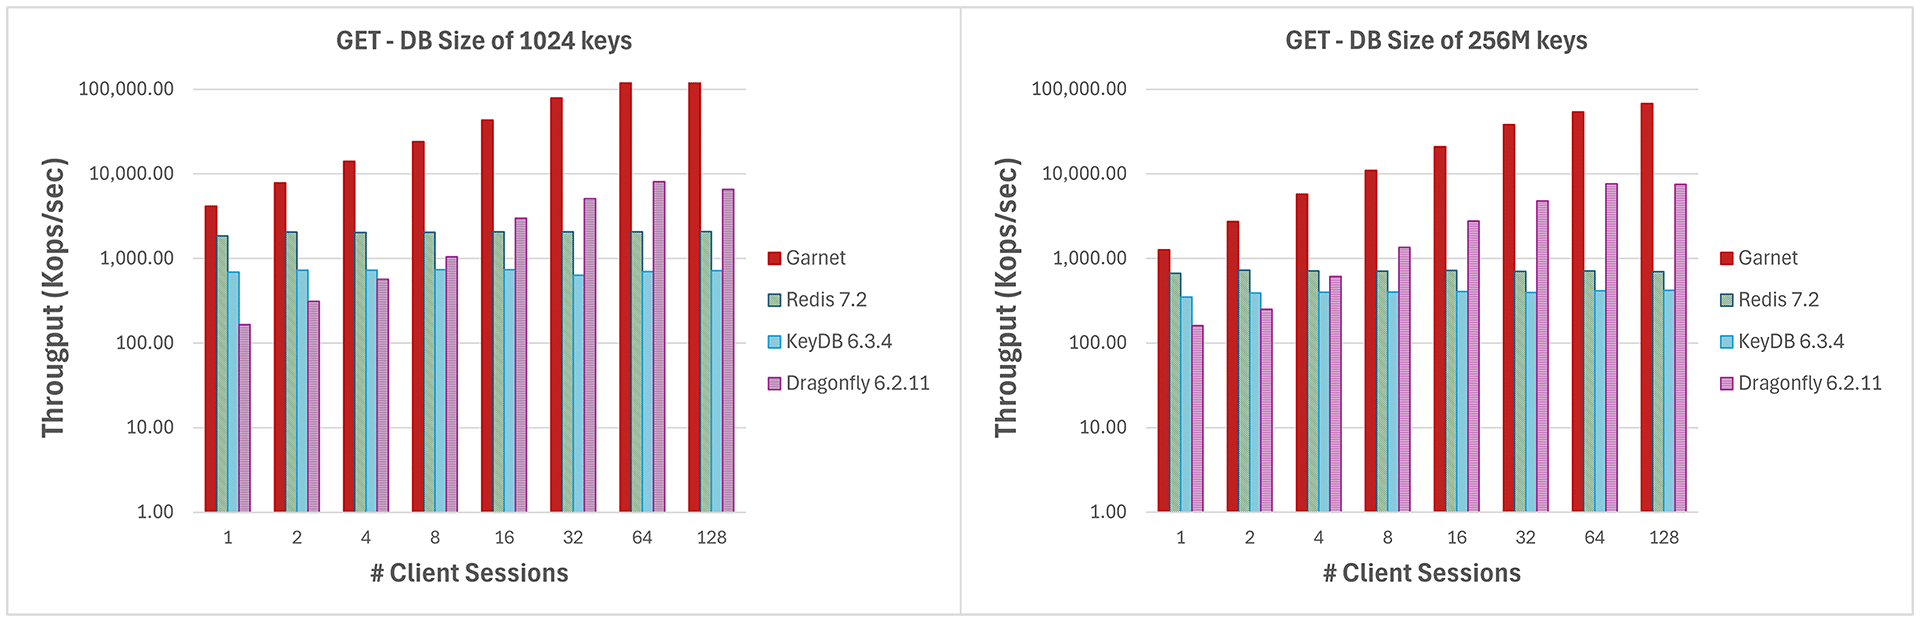 Two clustered column bar graphs comparing the throughput (log-scale) of various systems (Garnet, Redis, KeyDB, and Dragonfly) for a database size of 1024 keys and 256 million keys respectively. The x-axis varies the number of client sessions from 1 to 128. Garnet’s throughput is shown to scale significantly better as the number of client sessions is increased. 